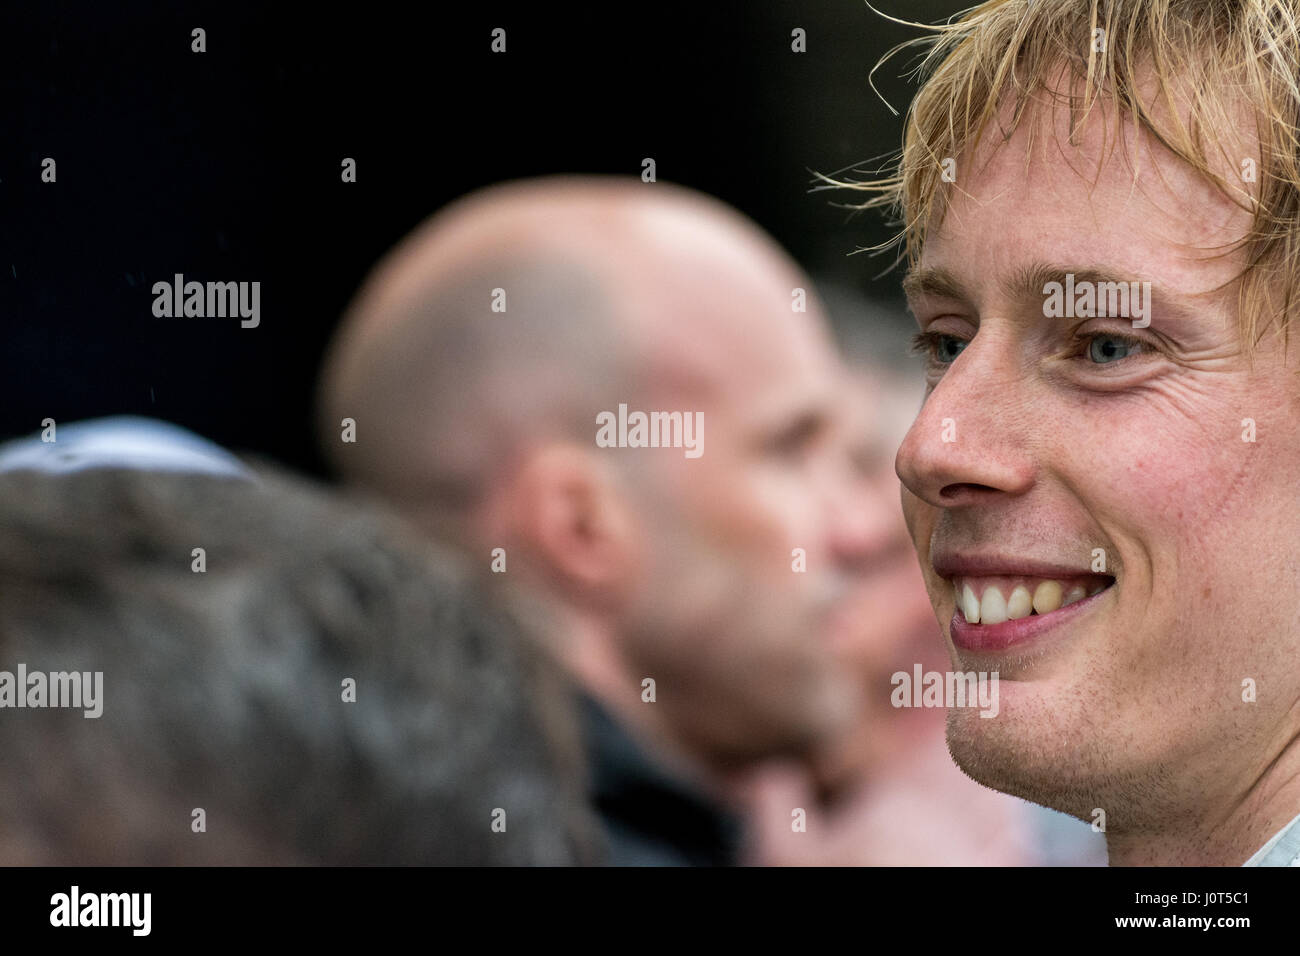 Towcester, Northamptonshire, UK. 16th Apr, 2017. FIA WEC racing driver Brendon Hartley (NZL) and Porsche LMP Racing after finishing 2nd during the 6 Hours of Silverstone of the FIA World Endurance Championship Autograph session at Silverstone Circuit Credit: Gergo Toth/Alamy Live News Stock Photo